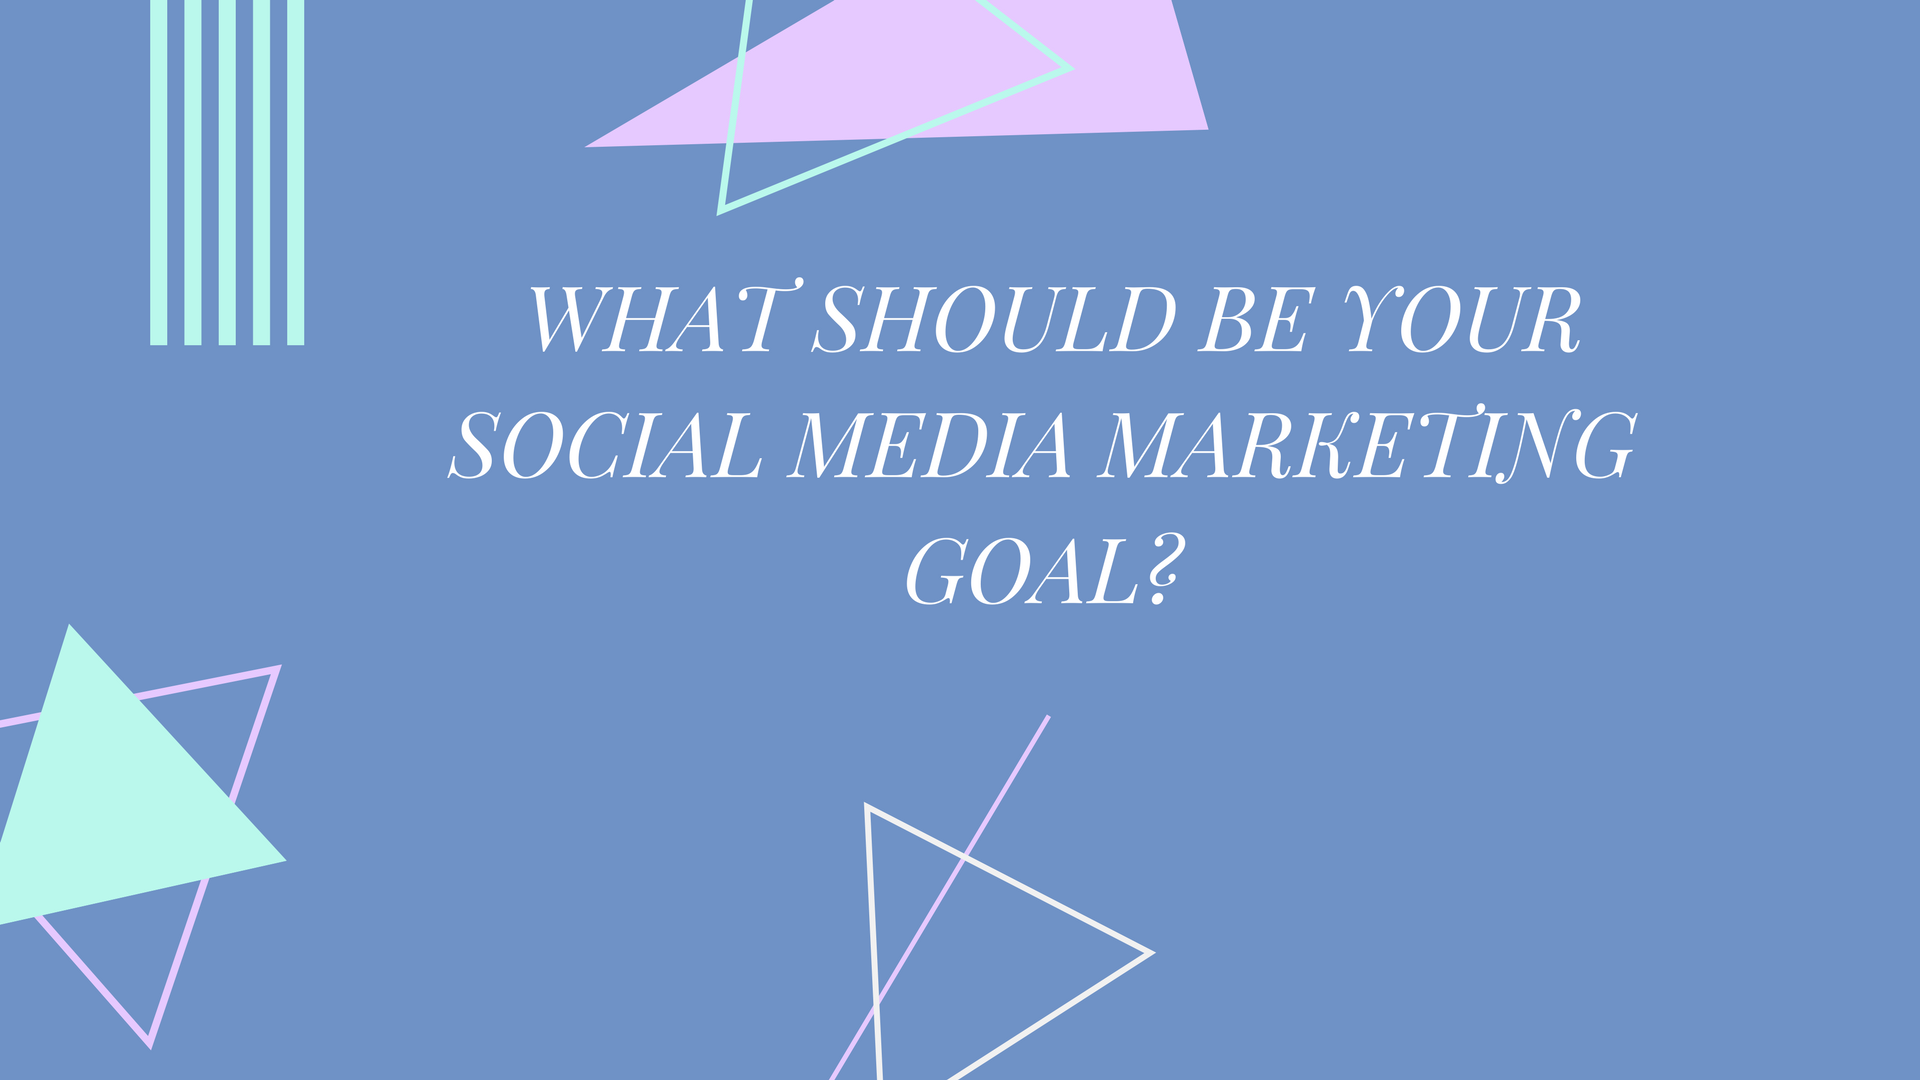 What Should Be Your Social Media Marketing Goal?